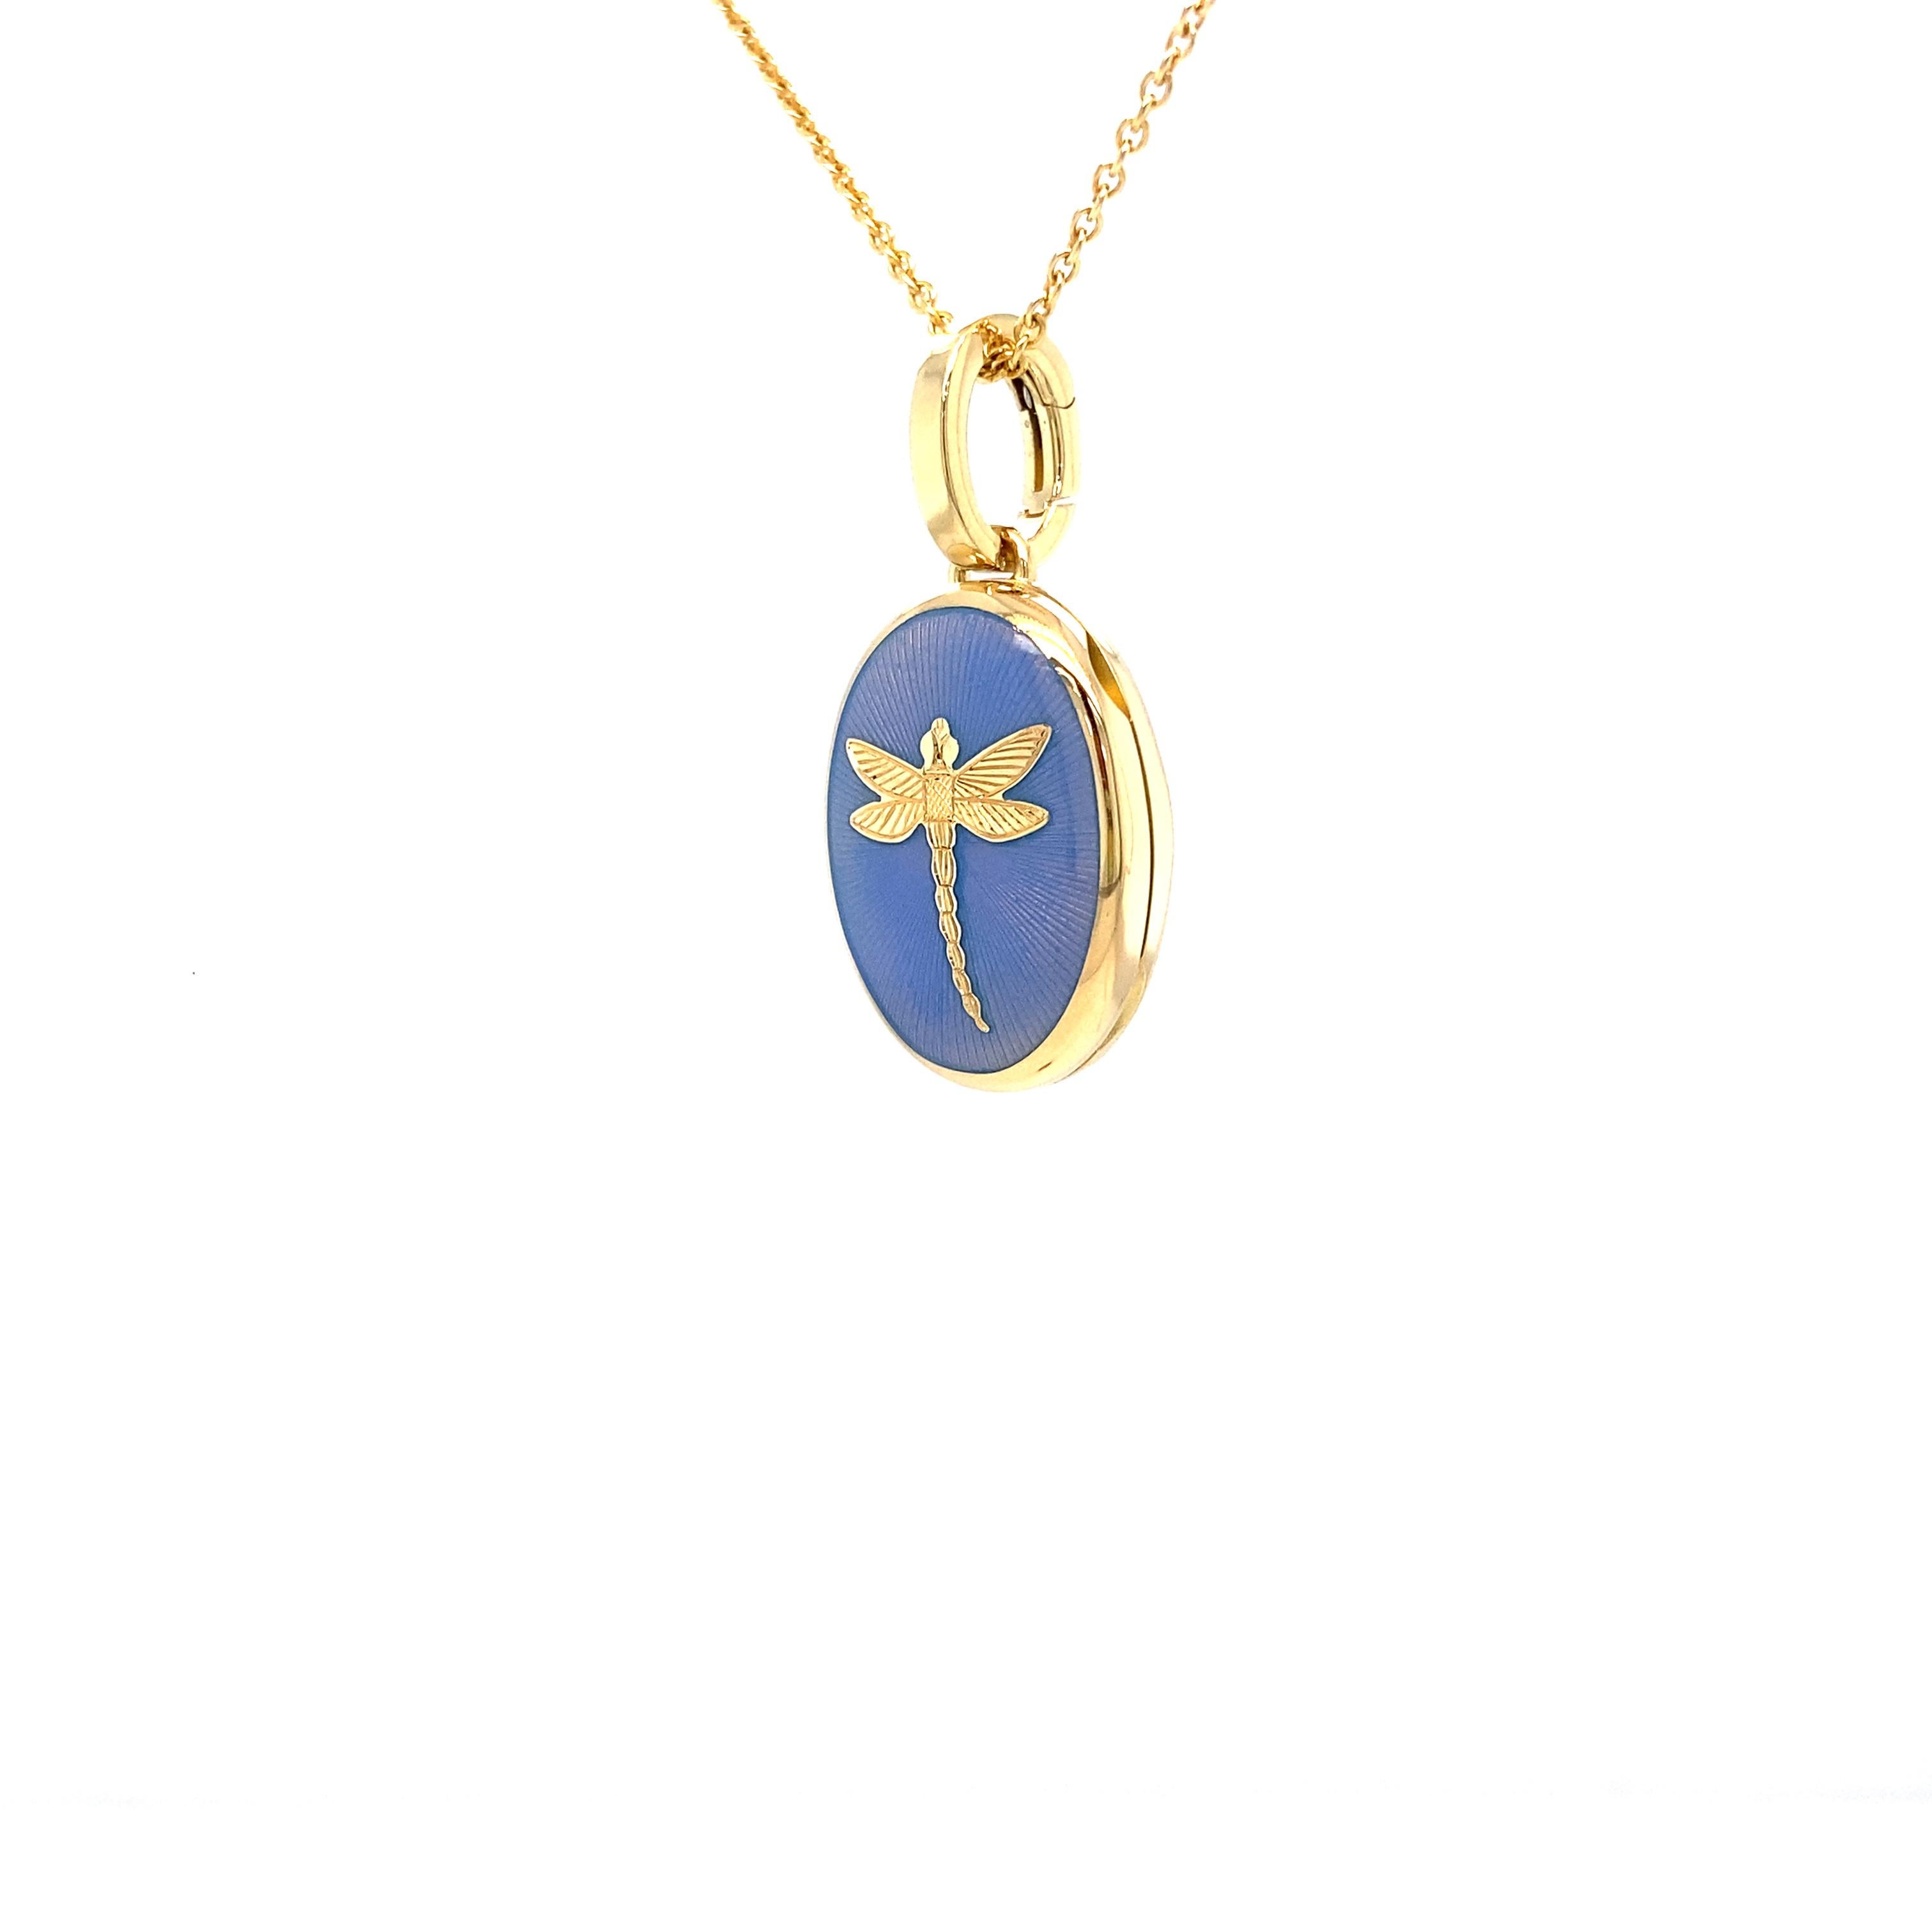 Victor Mayer customizable oval locket pendant necklace with dragonfly 18k yellow gold, Hallmark collection, translucent opalescent blue vitreous enamel, guilloche, measurements app. 15.0 mm x 20.0 mm

About the creator Victor Mayer
Victor Mayer is